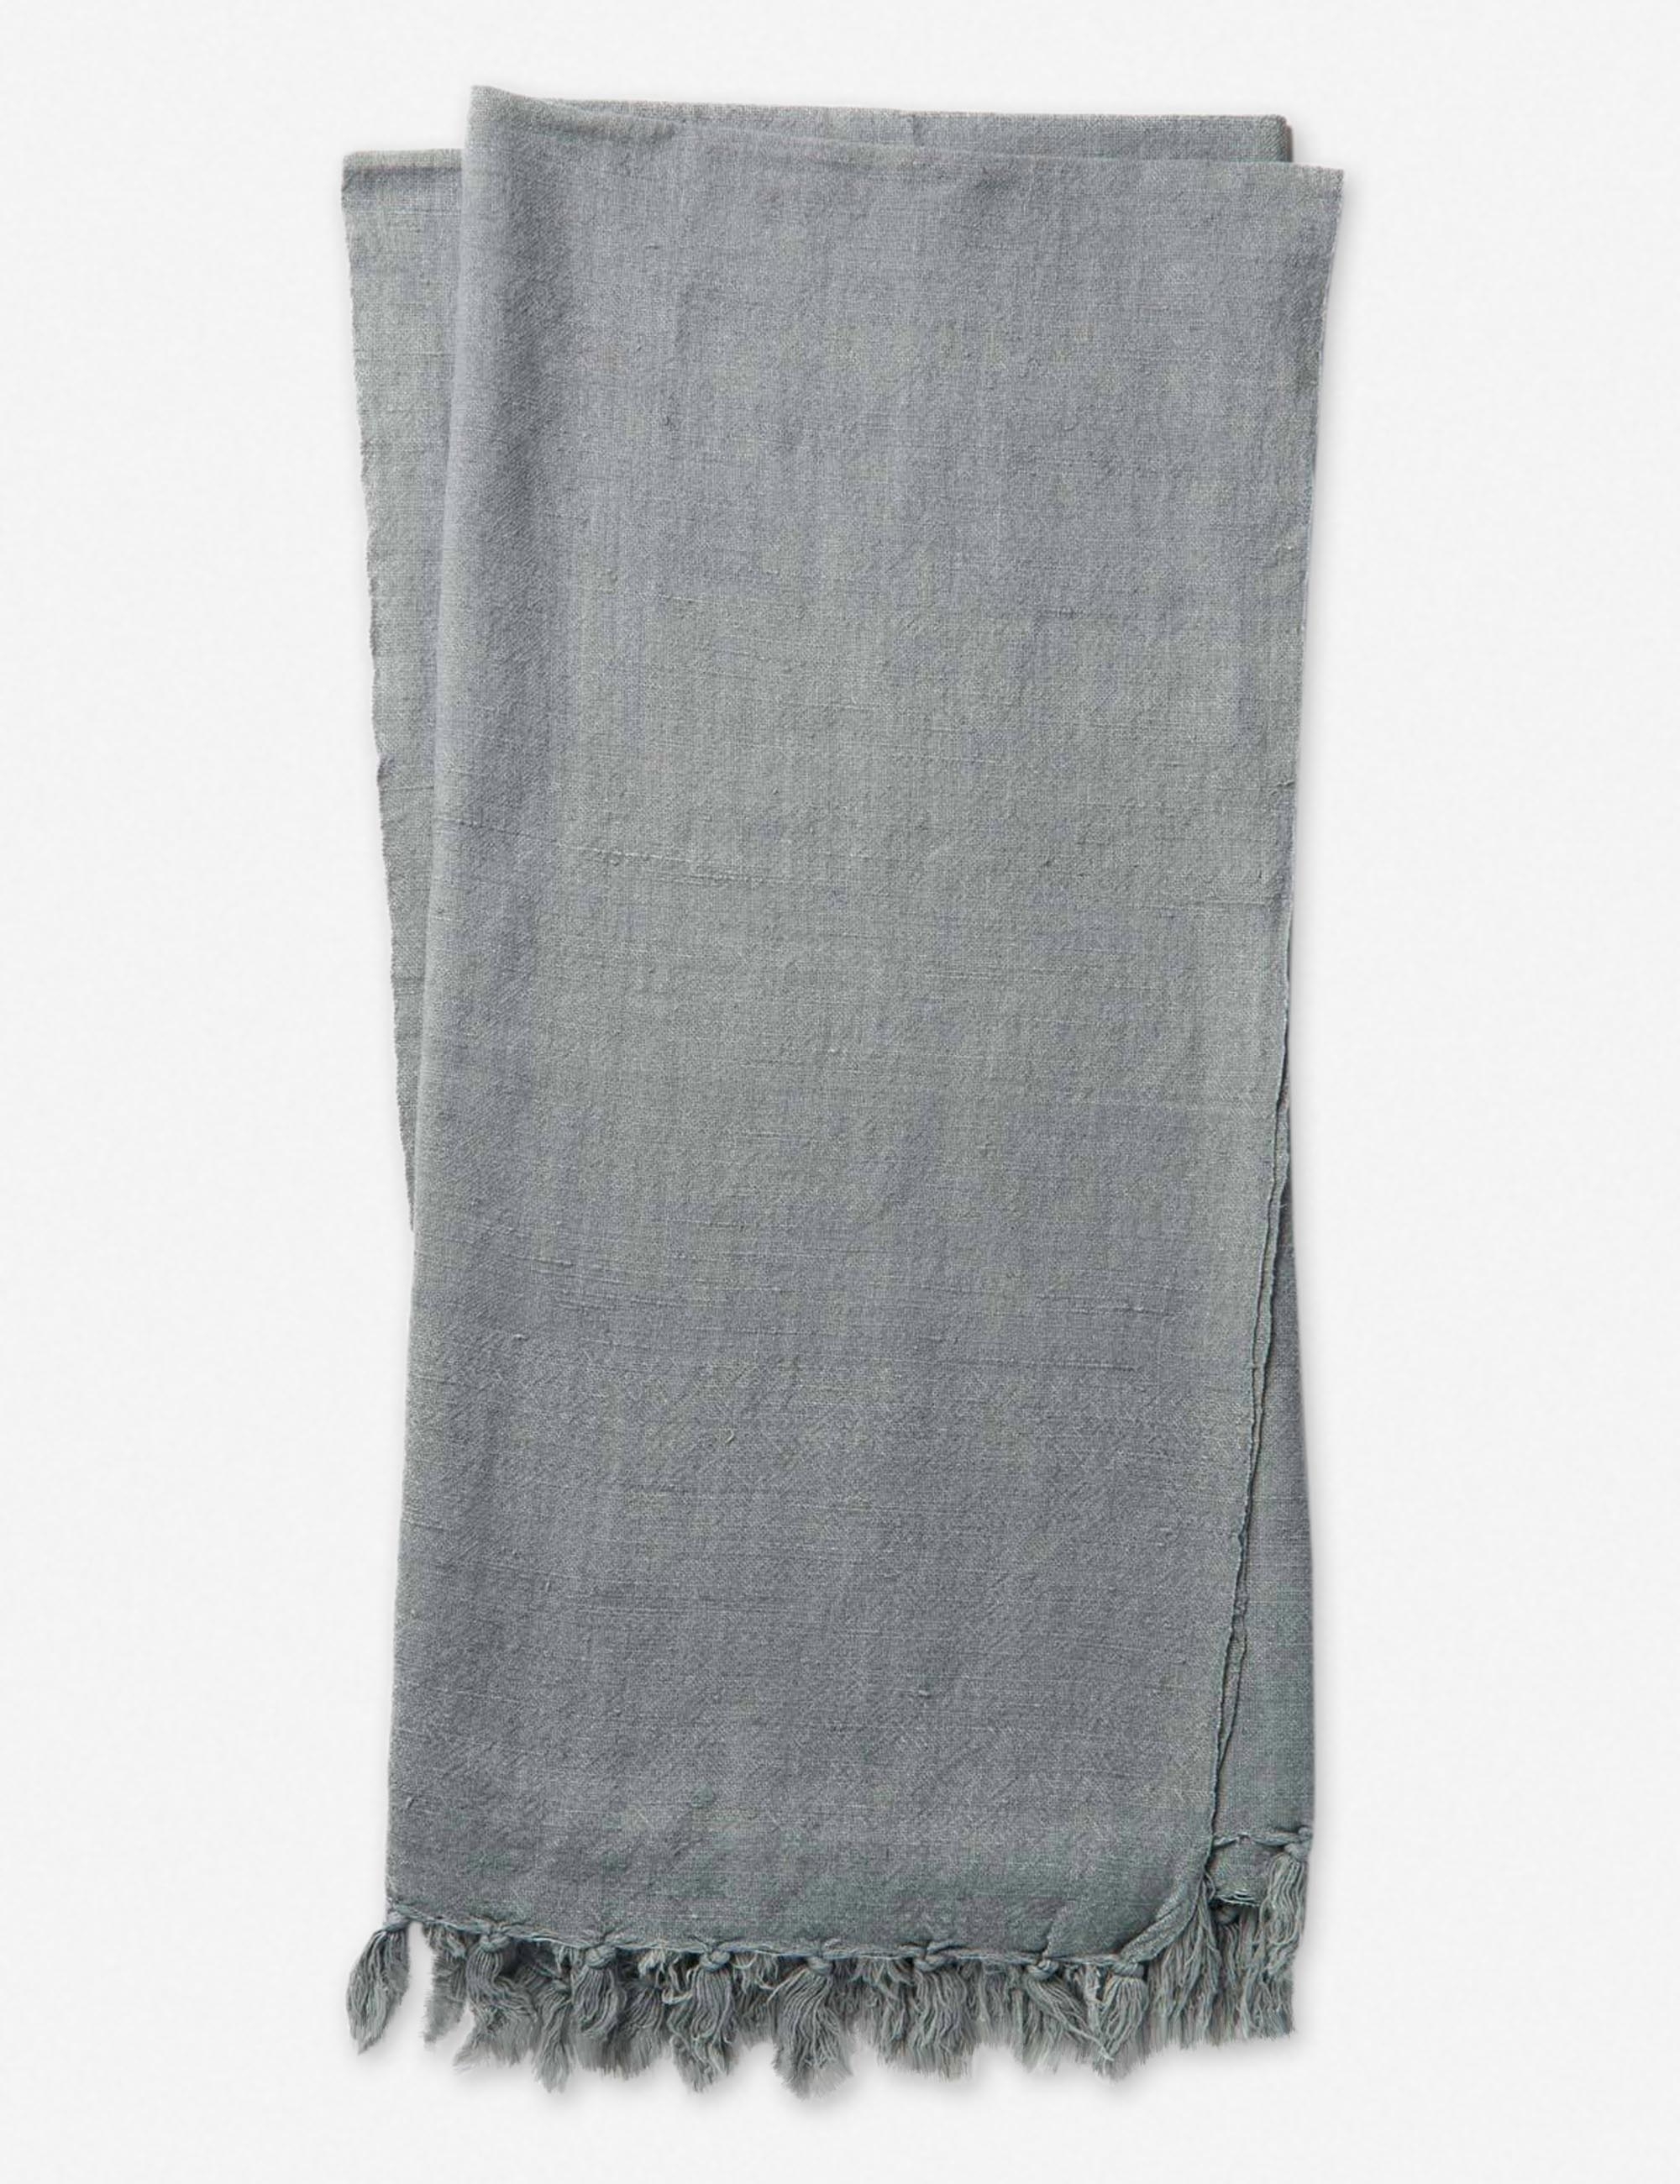 Brody Throw, Slate, ED Ellen DeGeneres Crafted by Loloi - Image 0